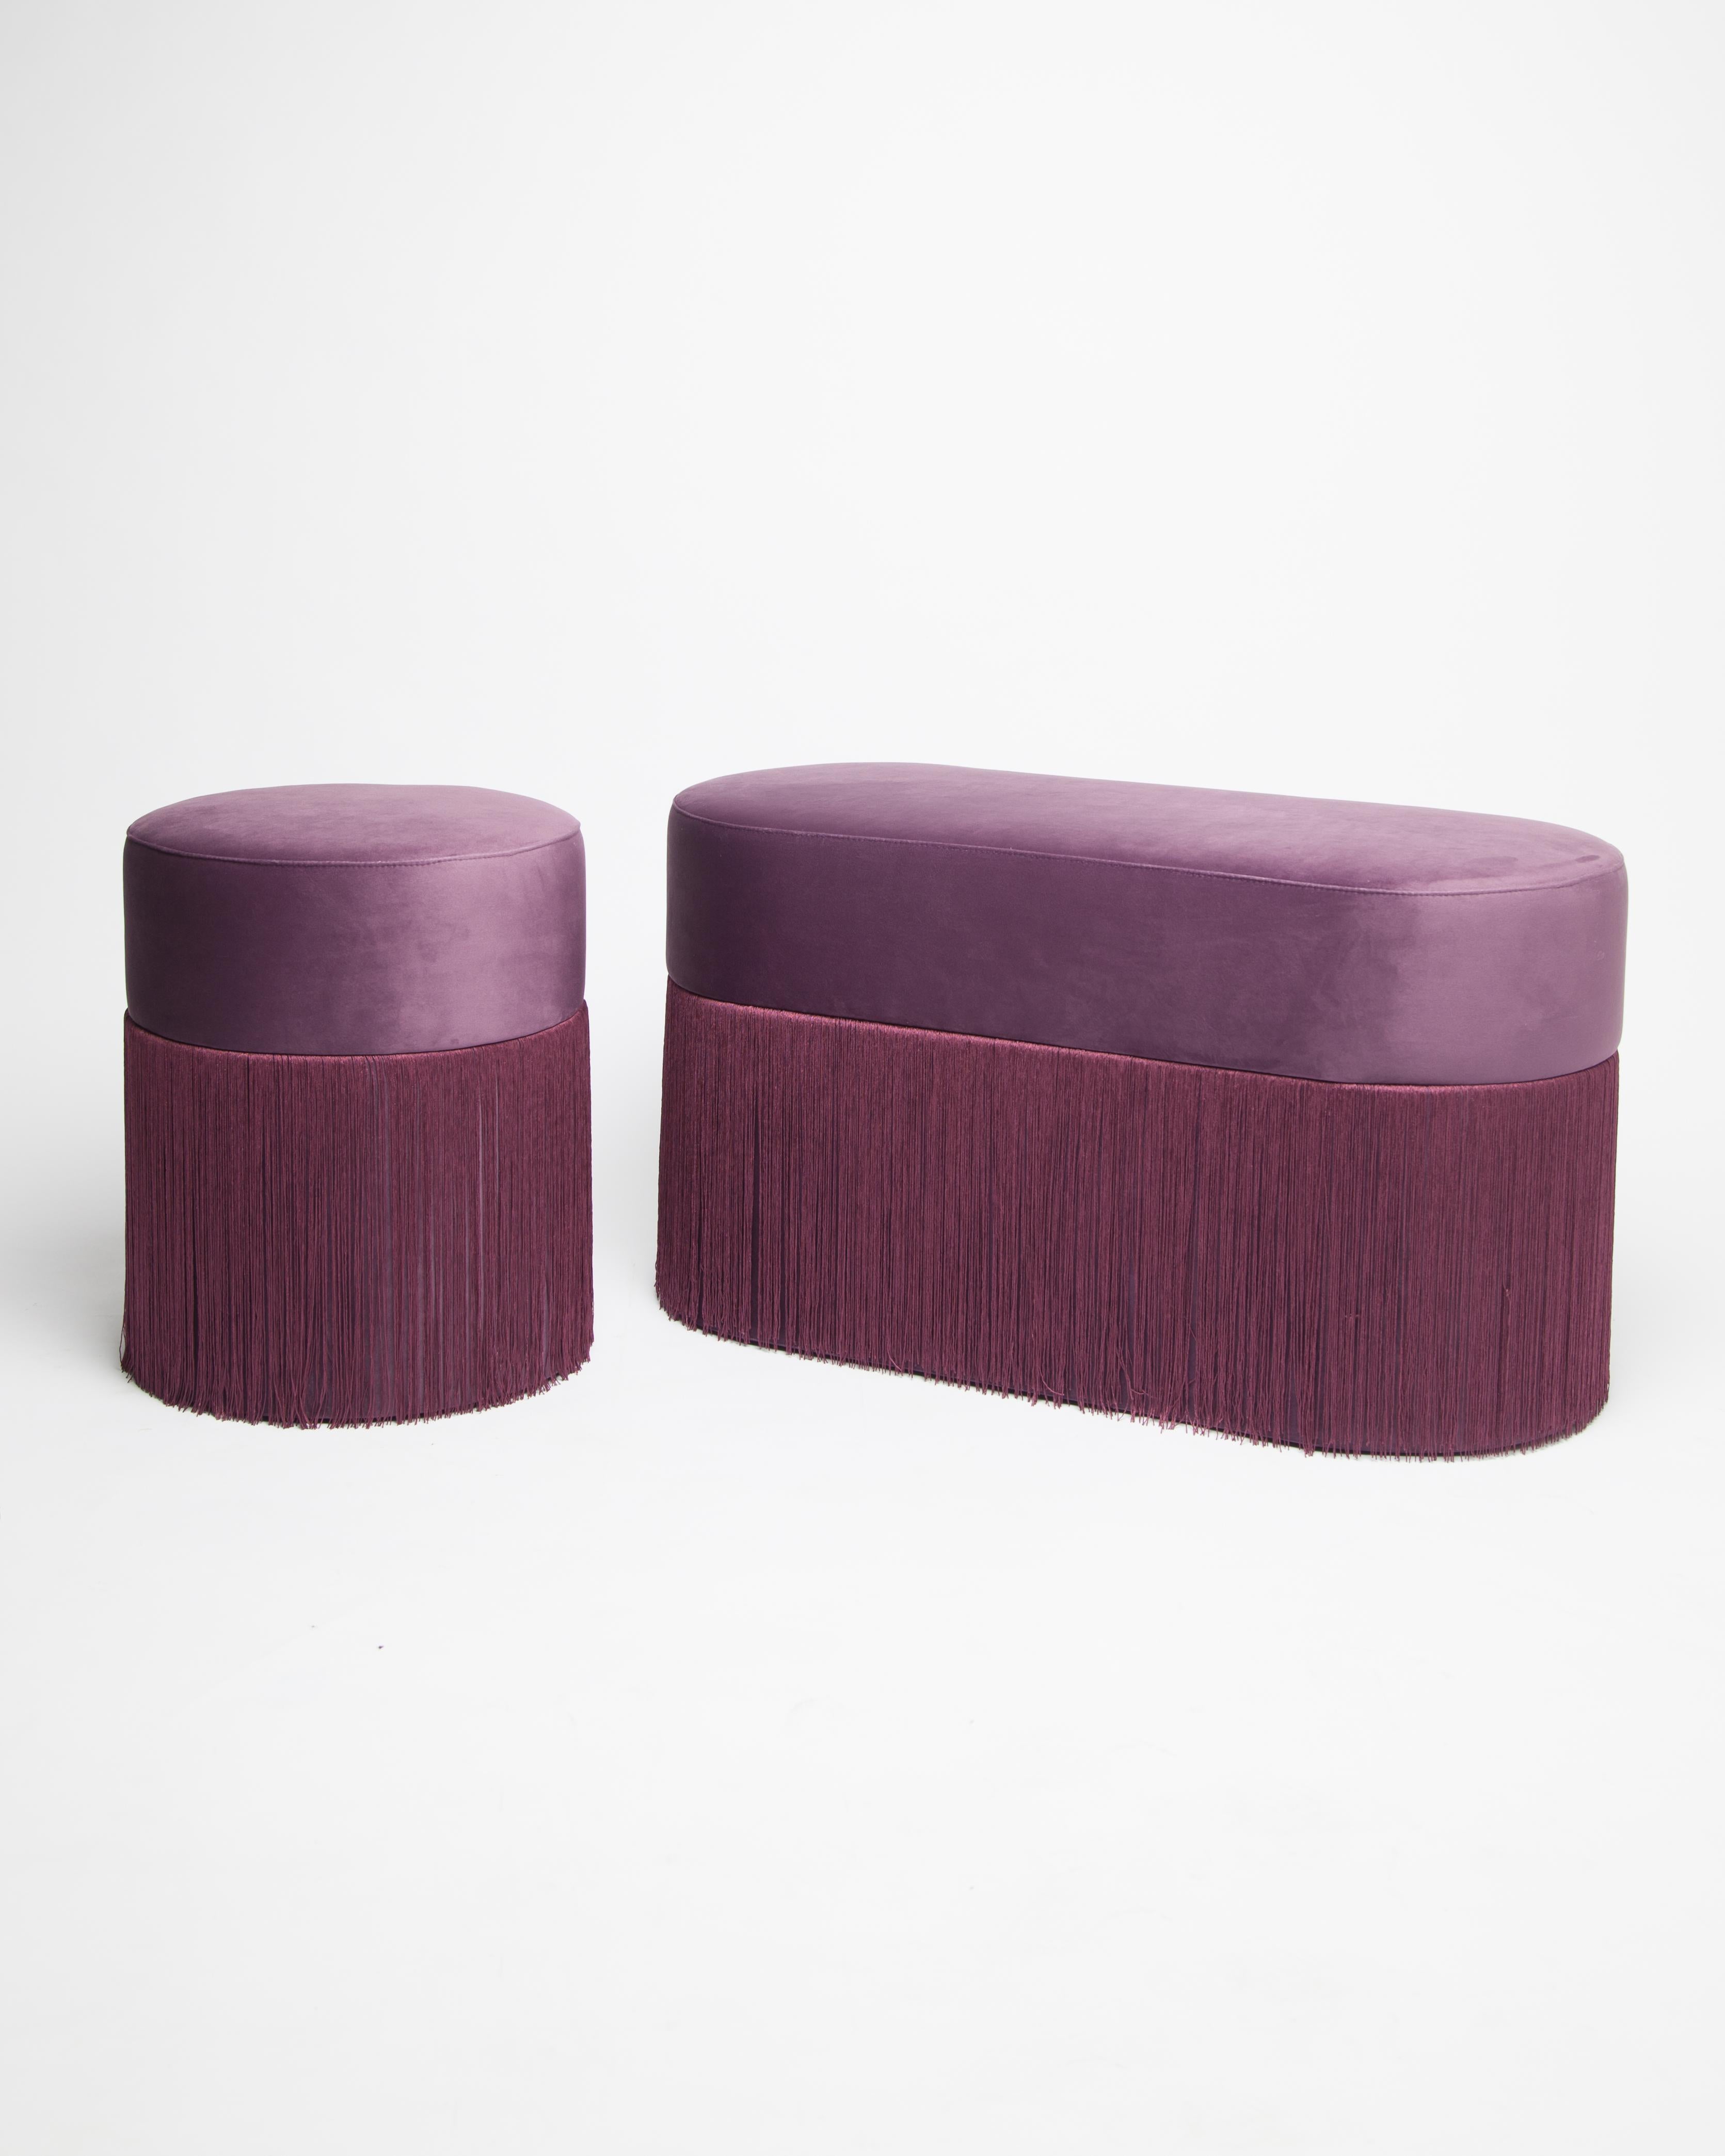 Set of 2 Poufs pill L and S by Houtique
Dimensions: H 45 x 80 x 35 cm
H 45 x 35 x 35 cm
Materials: Velvet upholstery and 30cm fringes


Art-Deco style pouf with wood structure and velvet fabric.
2 fiber-board discs of 16mm, joined by wooden